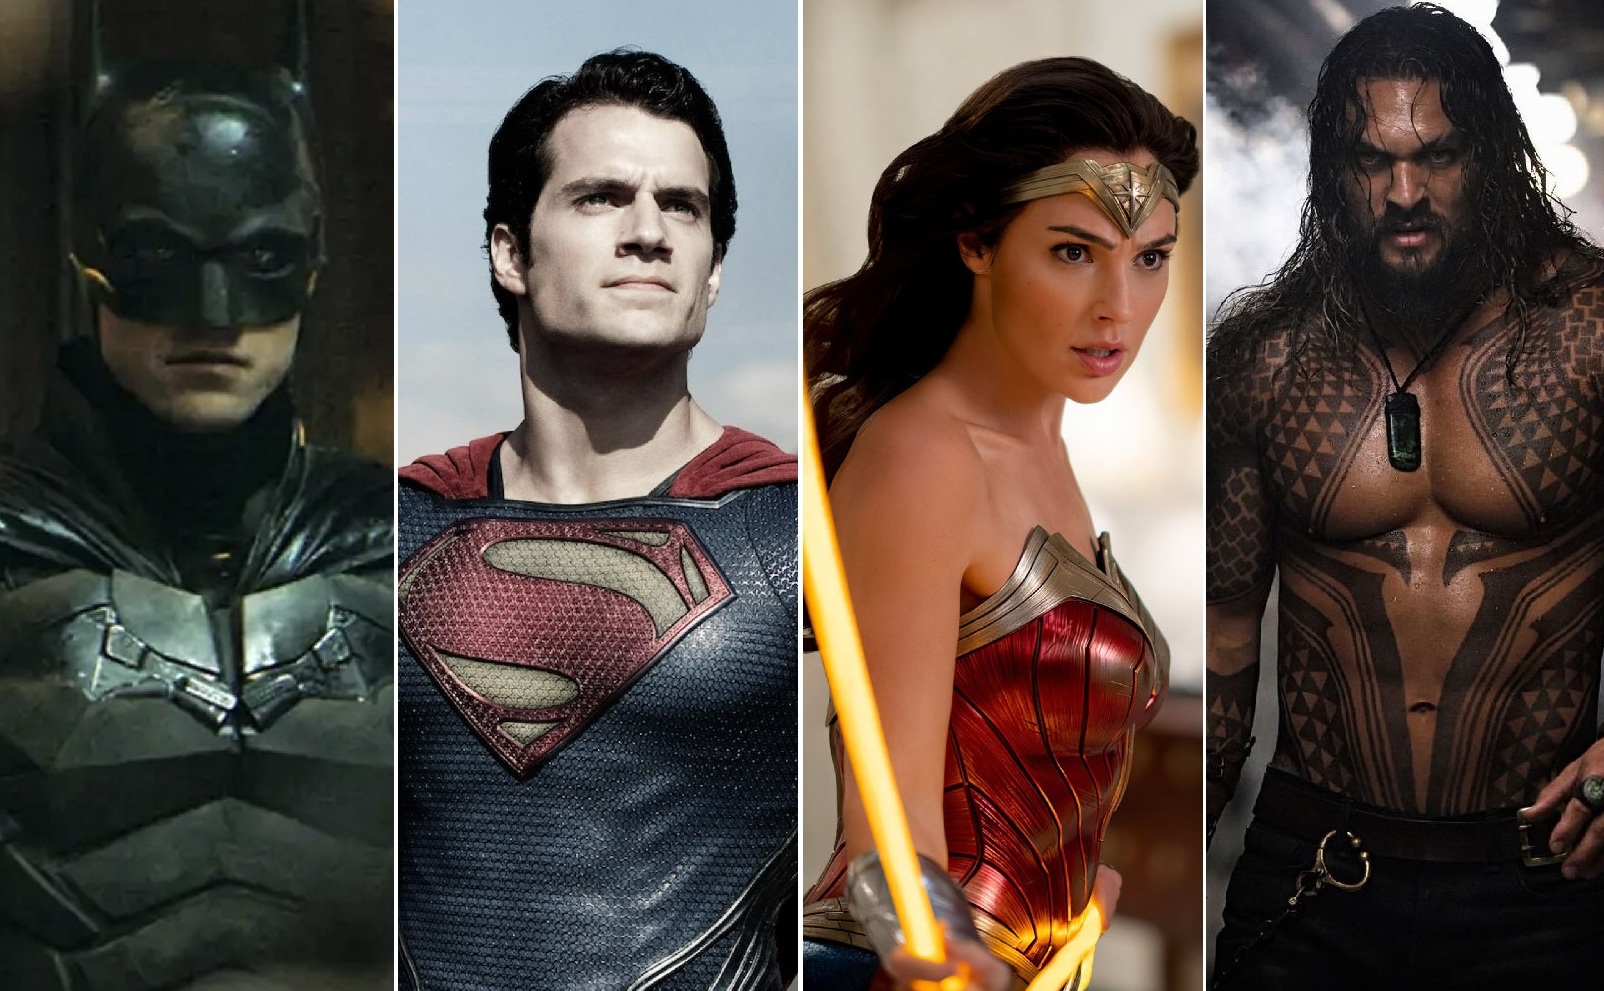 What Does the Future of DC Movies Look Like? Den of Geek